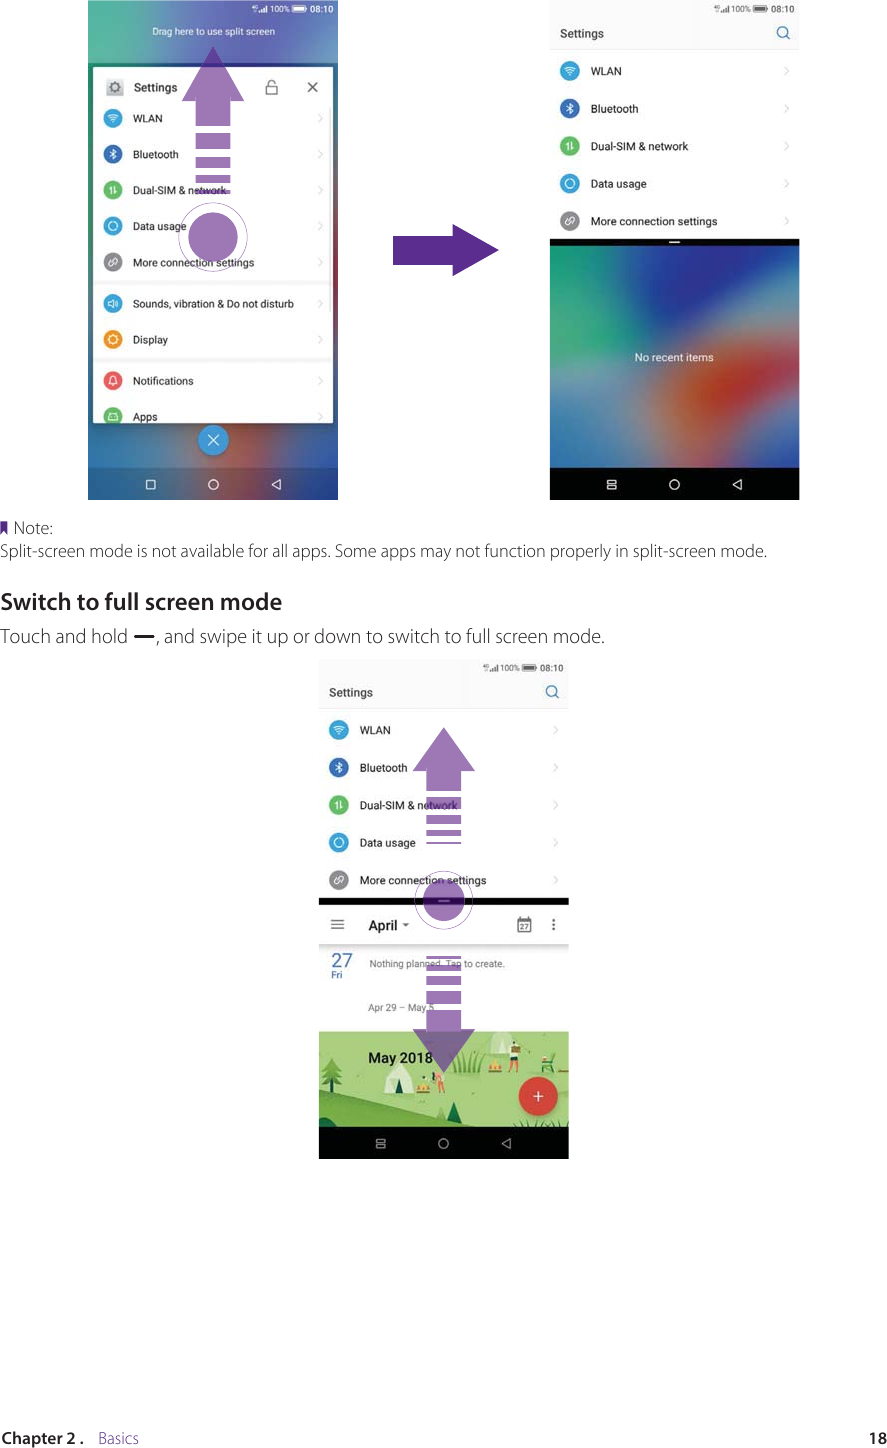 18Chapter 2 .    BasicsNote:Split-screen mode is not available for all apps. Some apps may not function properly in split-screen mode.Switch to full screen modeTouch and hold  , and swipe it up or down to switch to full screen mode.